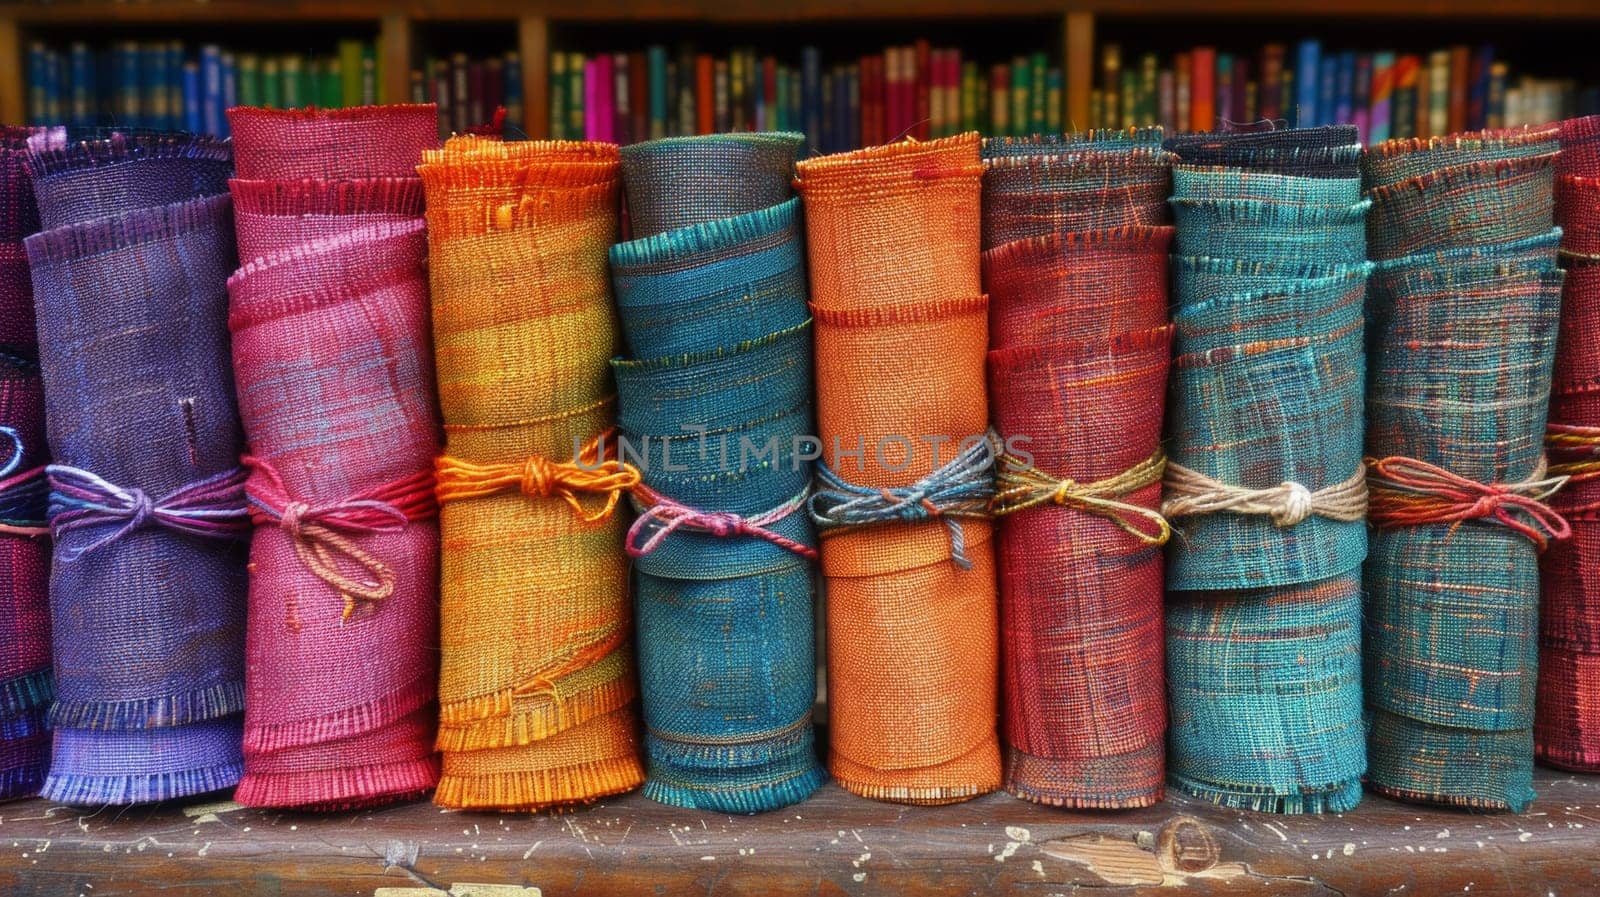 A row of colorful cloths tied with string and sitting on a table